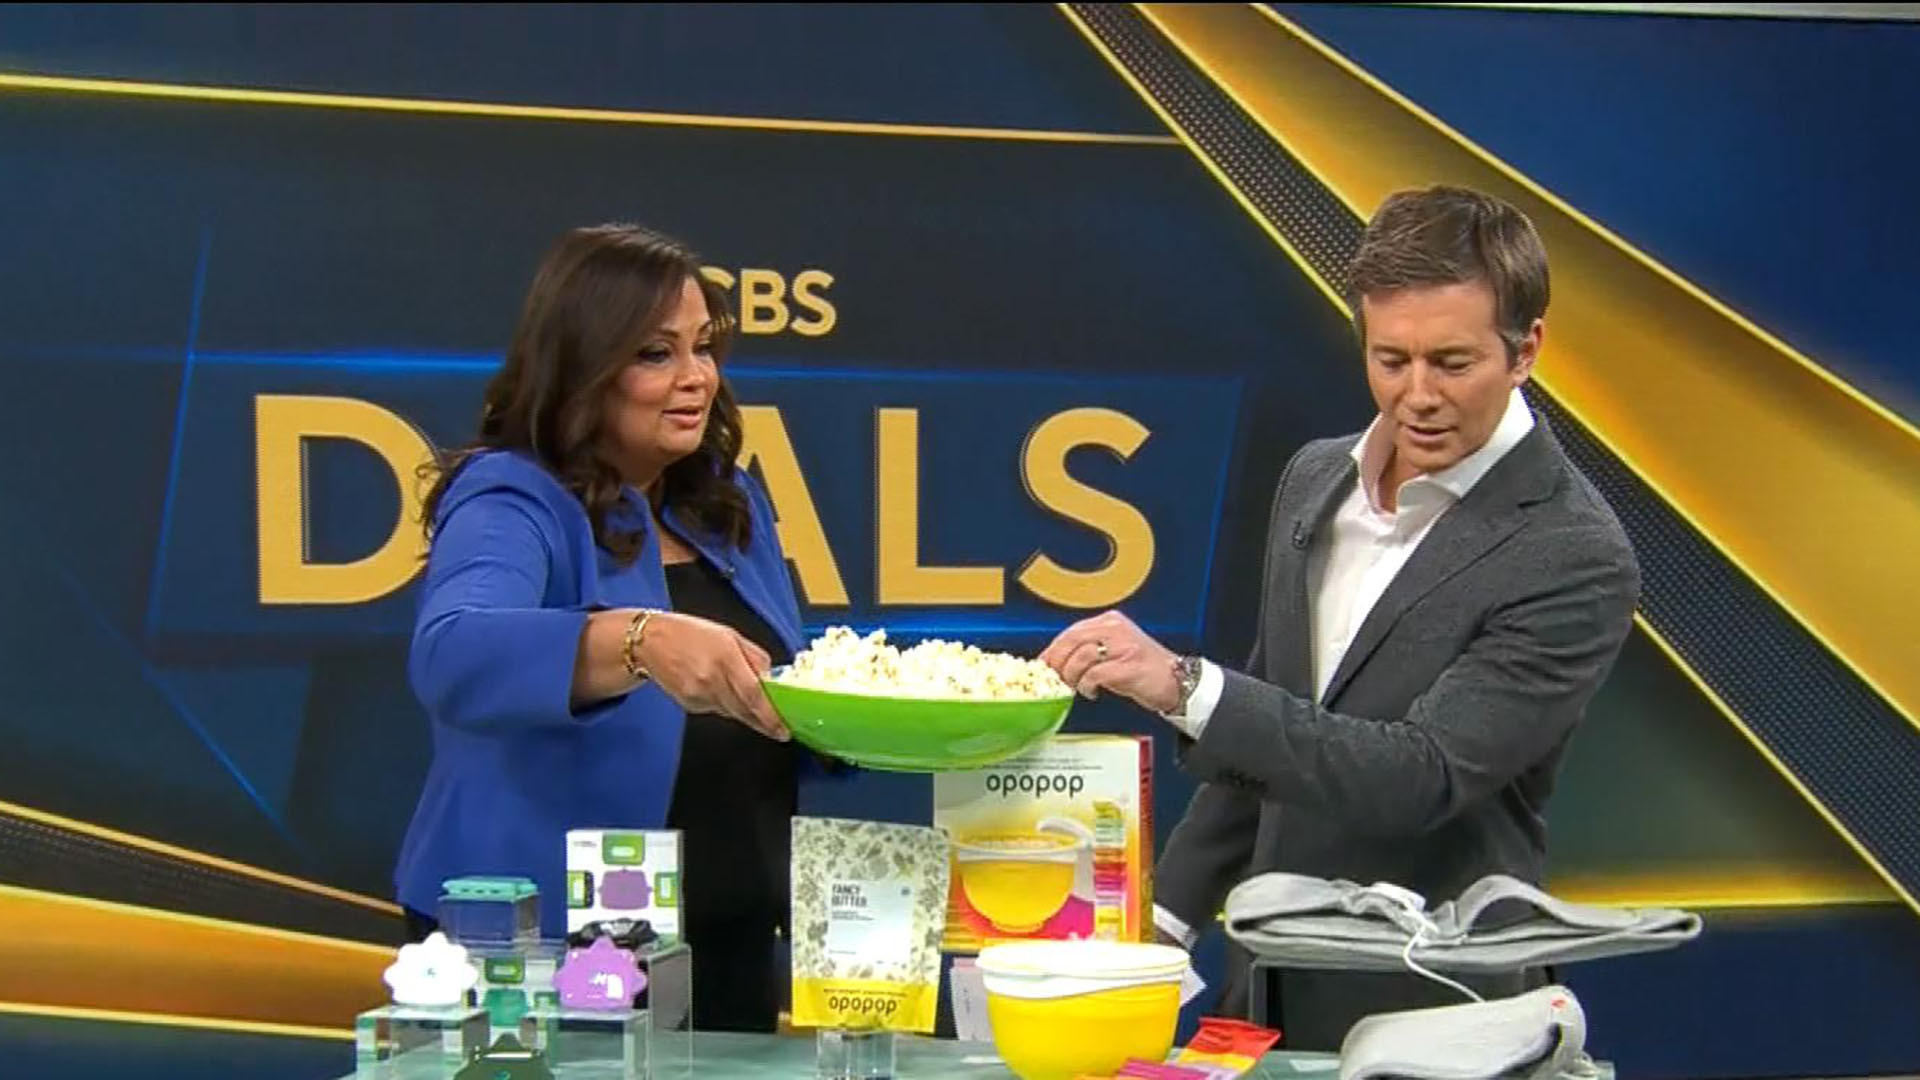 Watch CBS Saturday Morning CBS Deals Products to help you relax